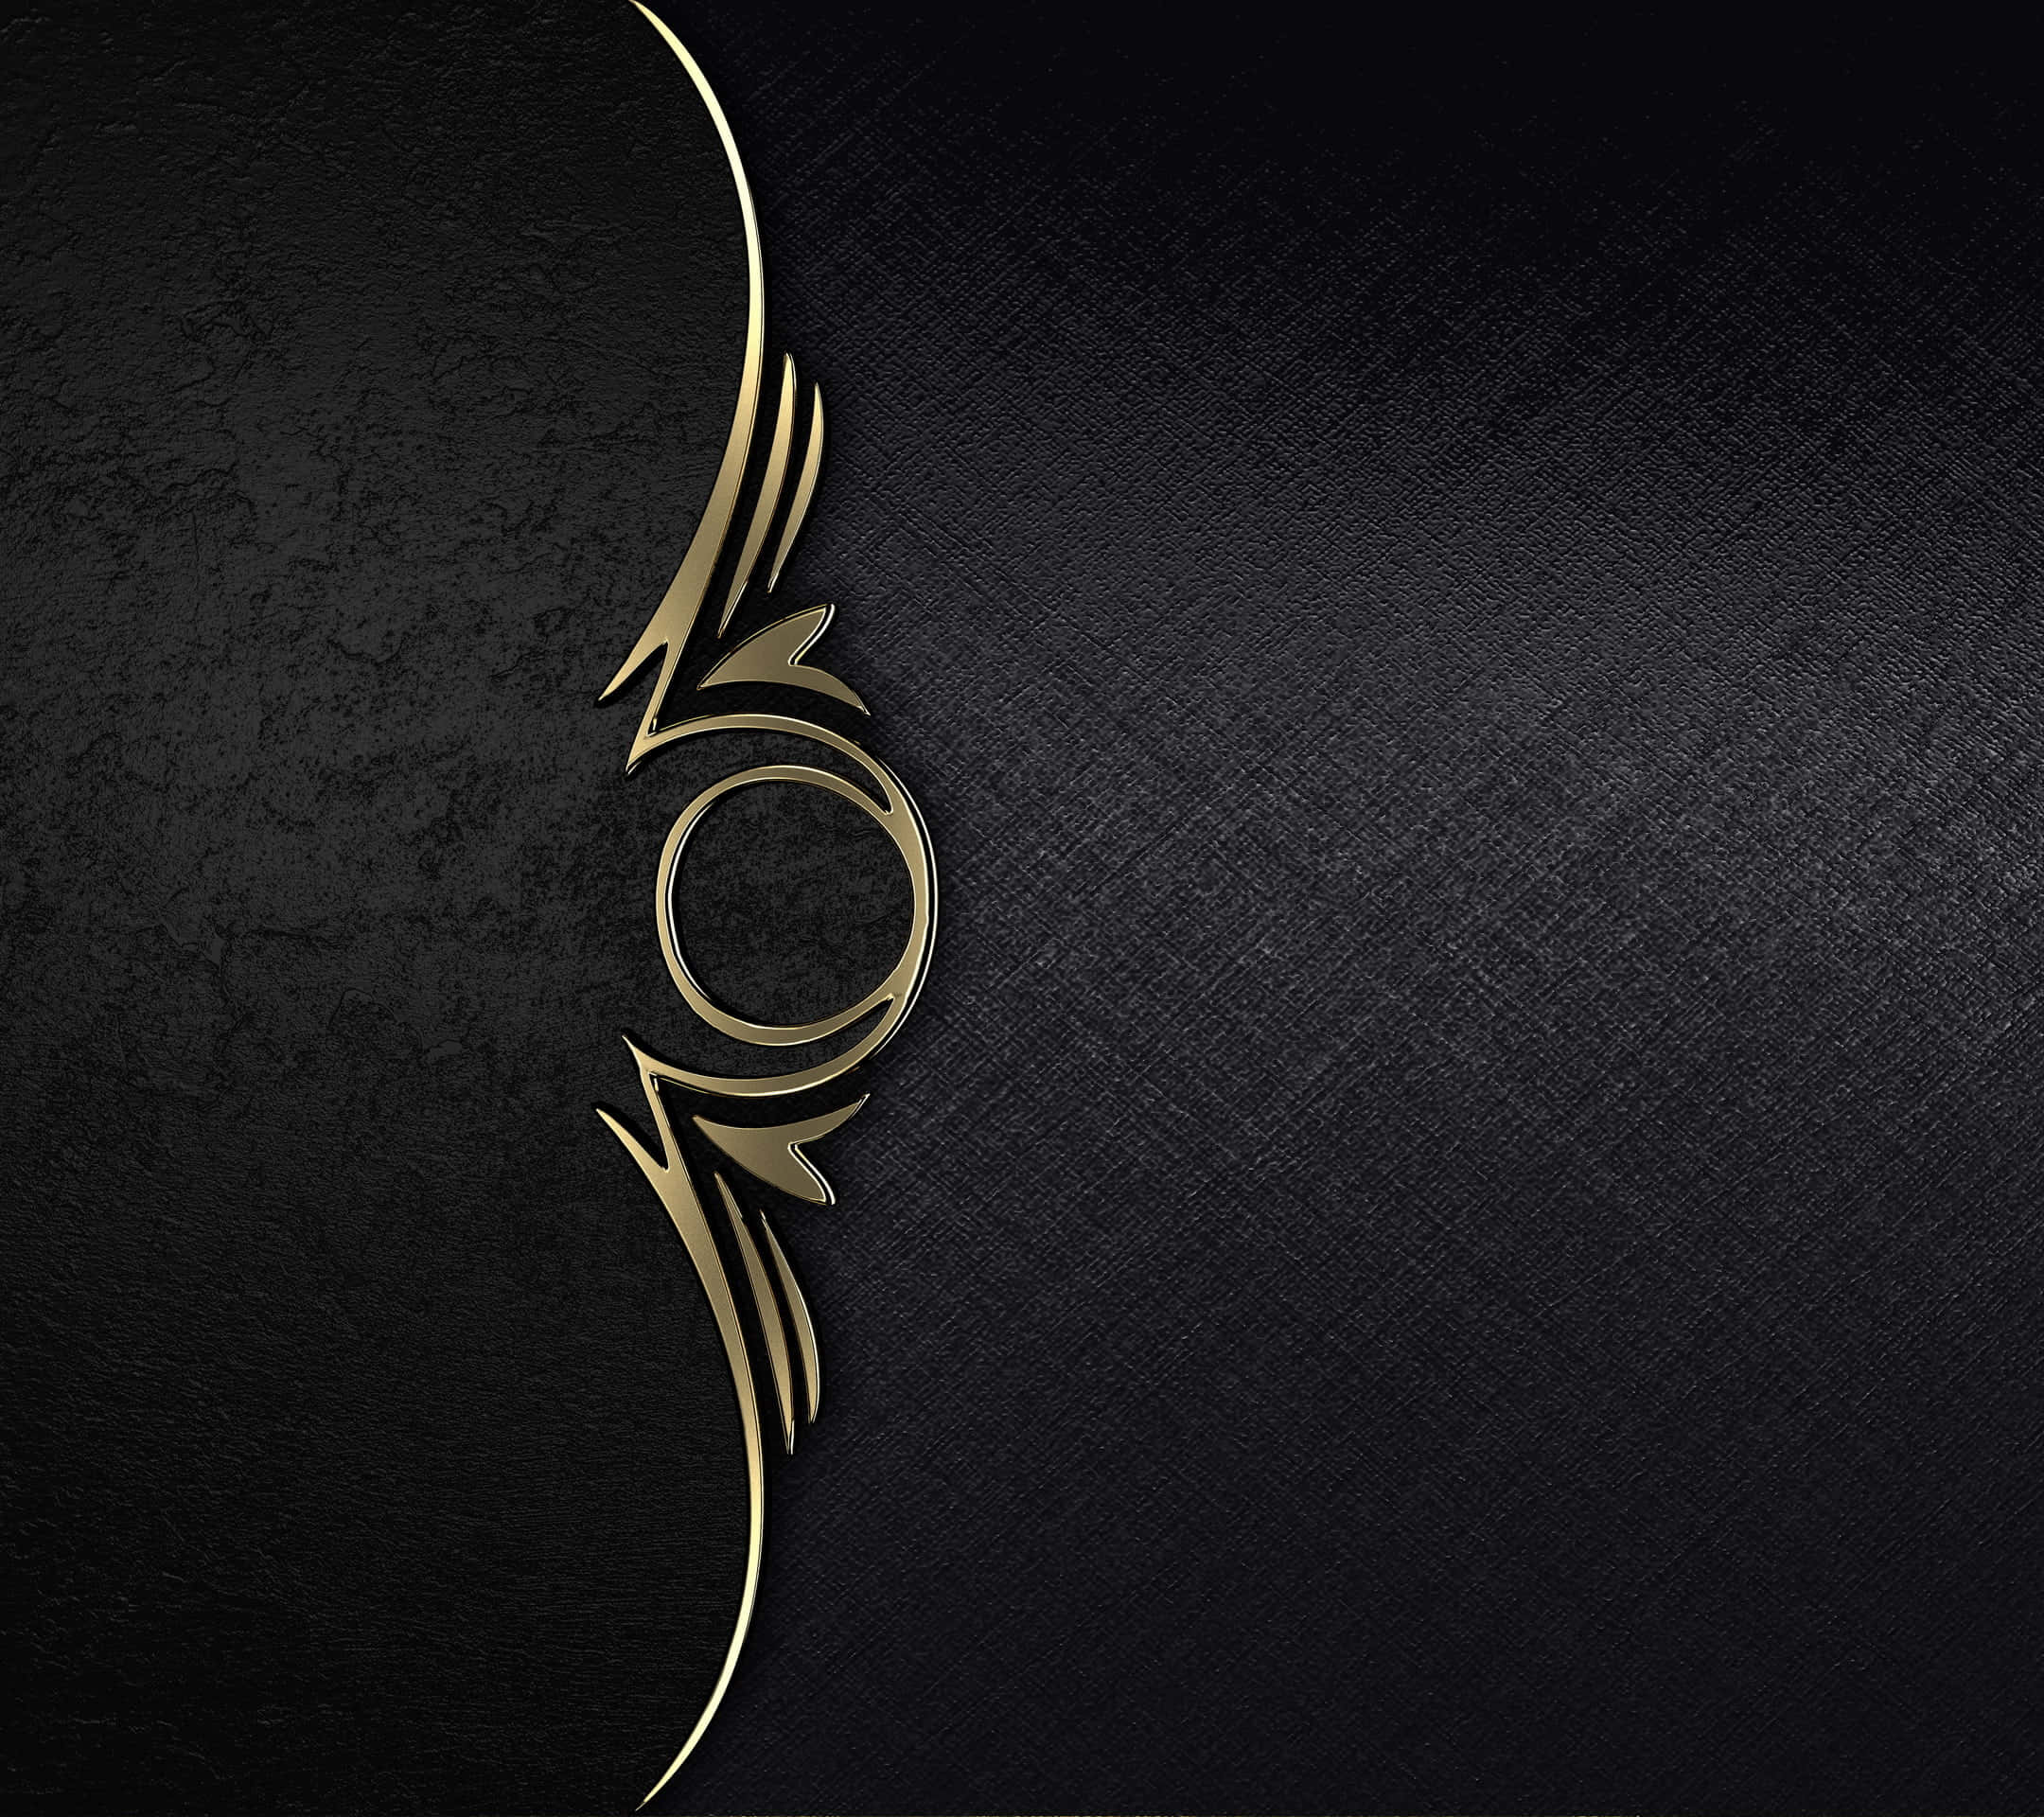 Stylish Elegance: A Black and Gold Abstract Background